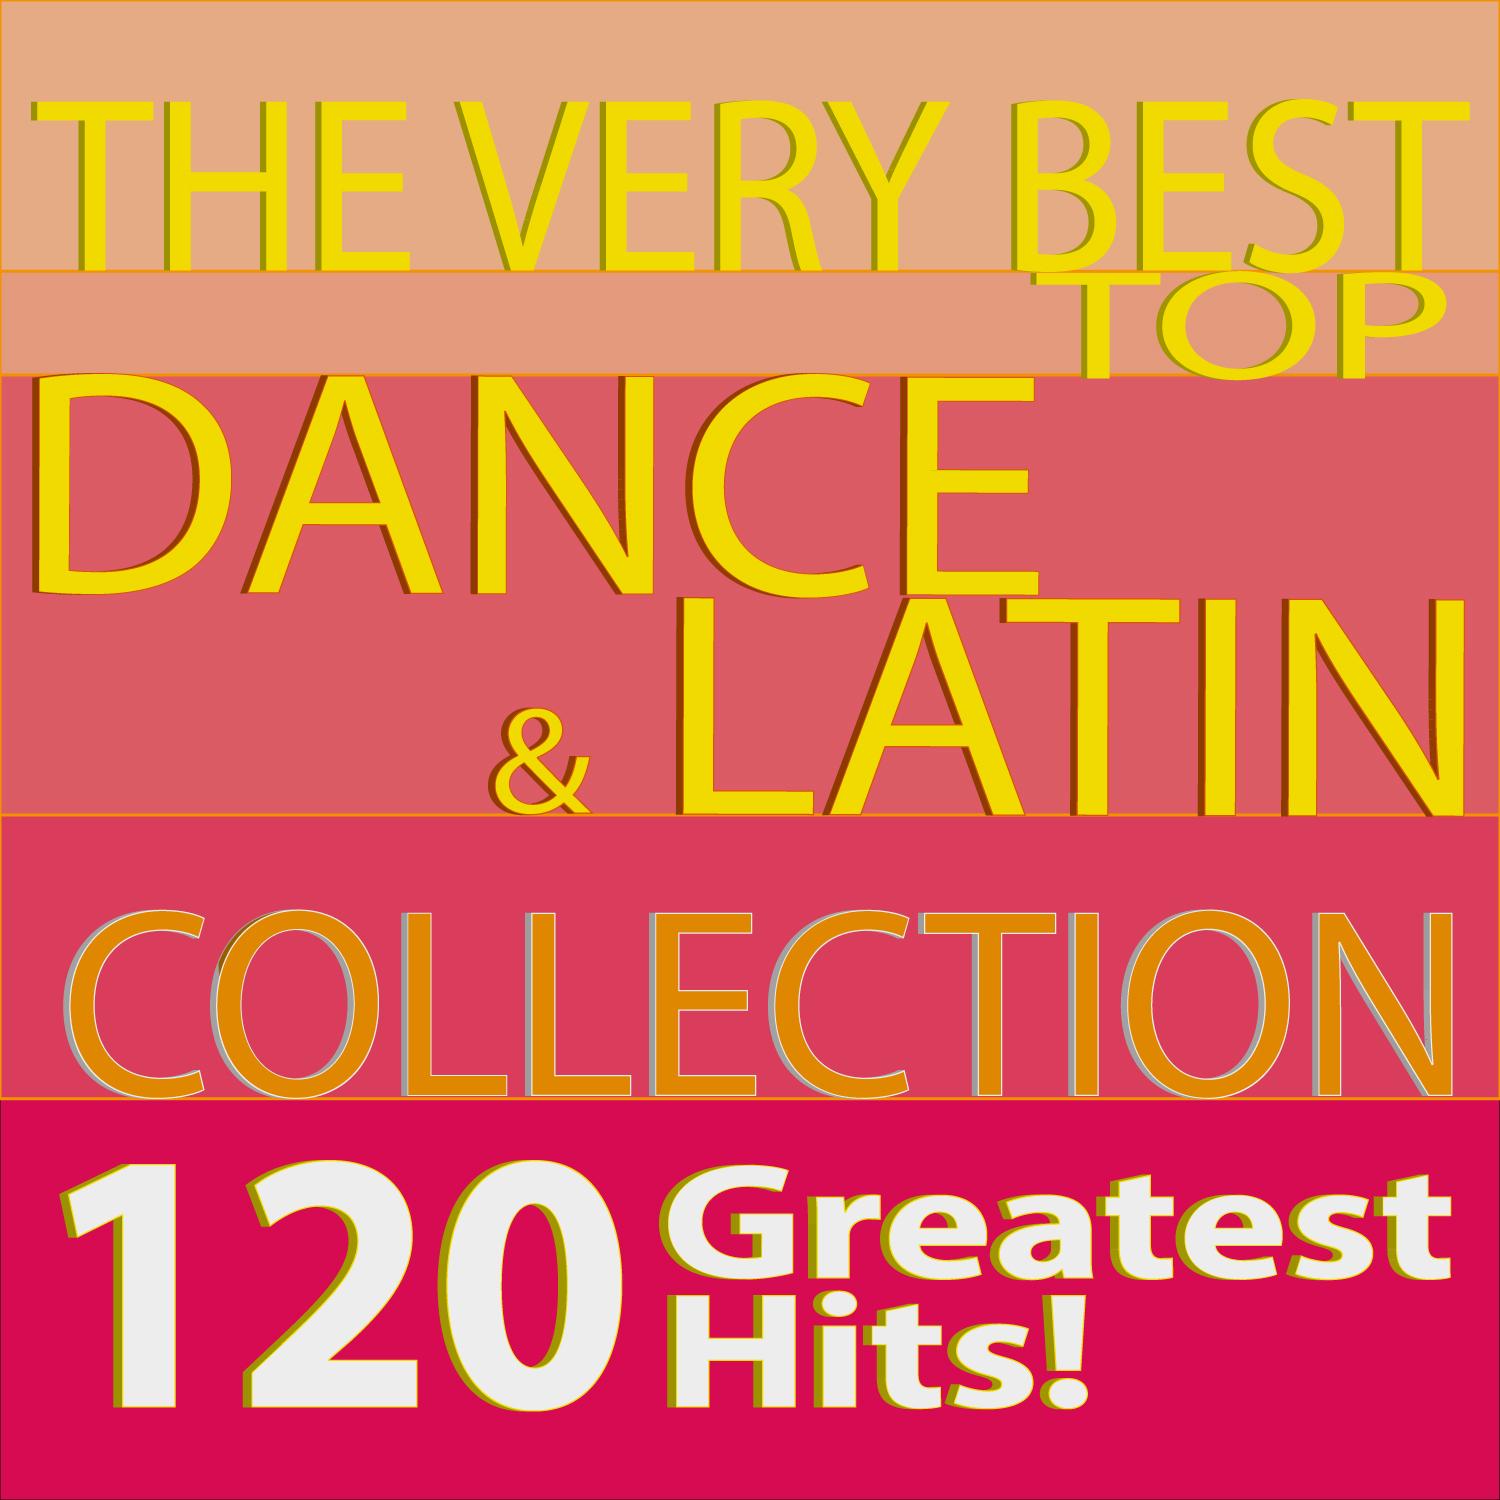 Happy Dances! The Best Covers...More 120 Hits